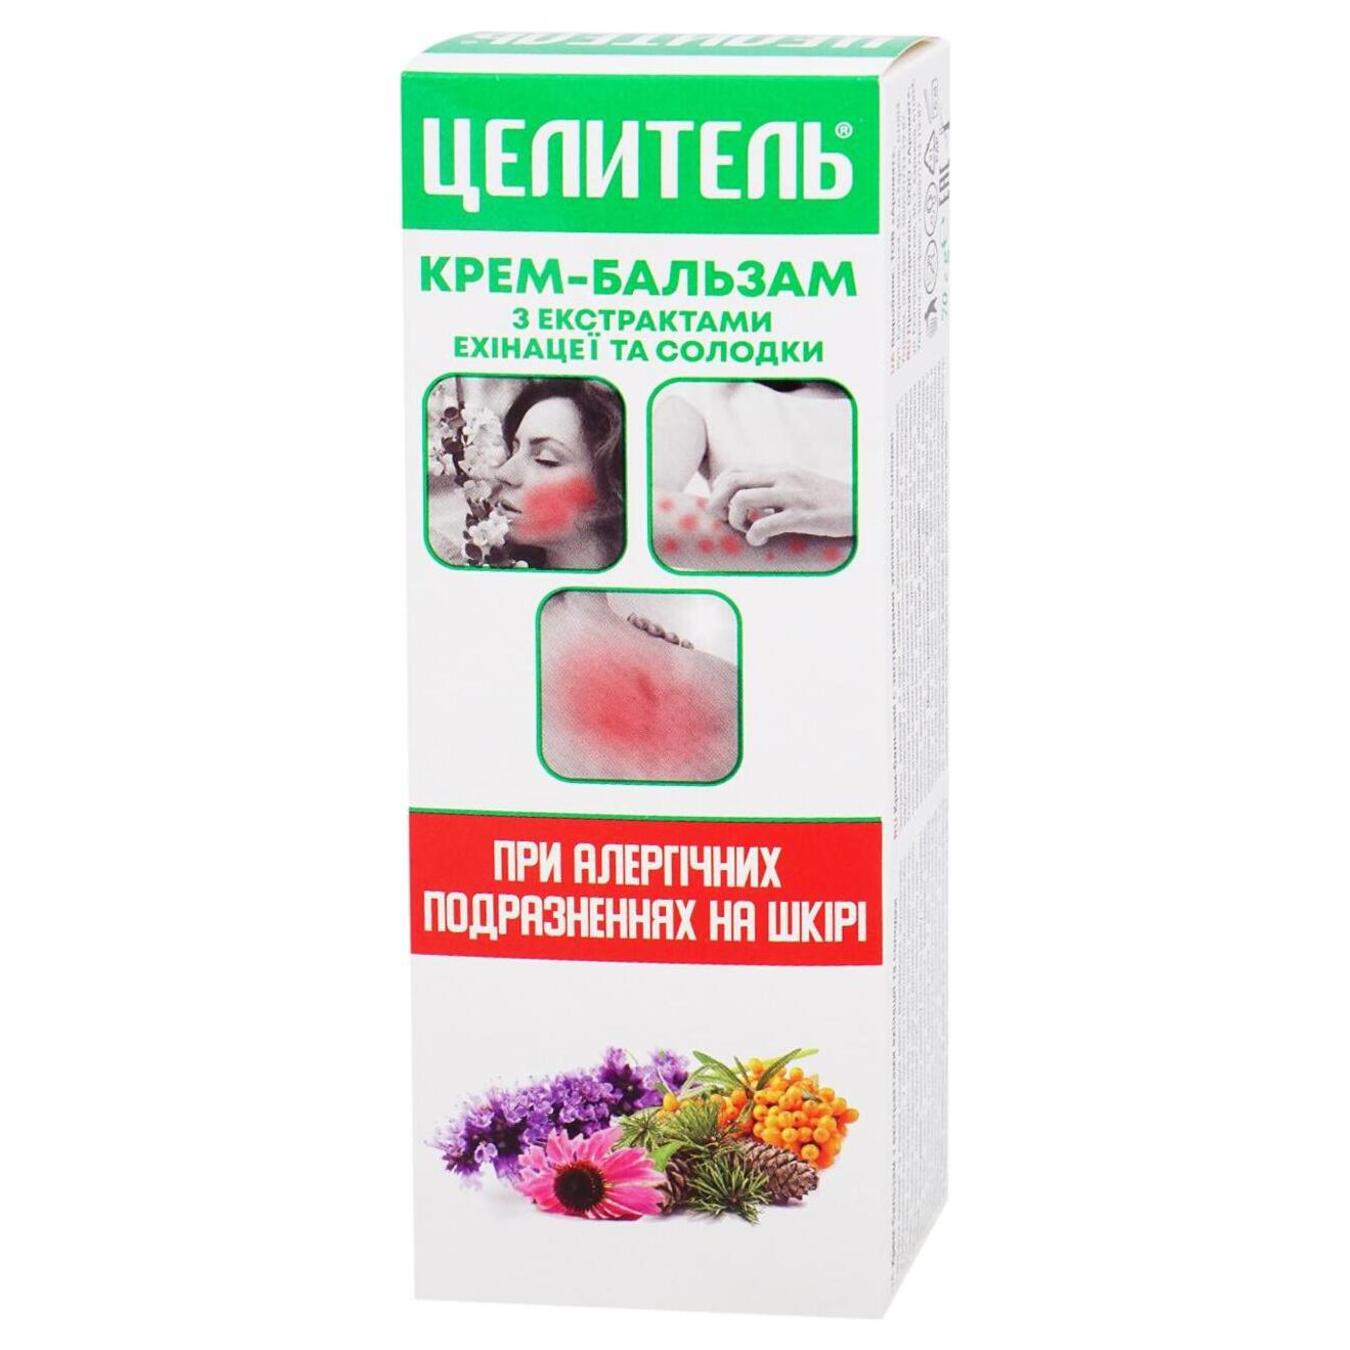 Celitel cream-balm with extracts of echinacea and licorice for the relief of allergic irritations 70g